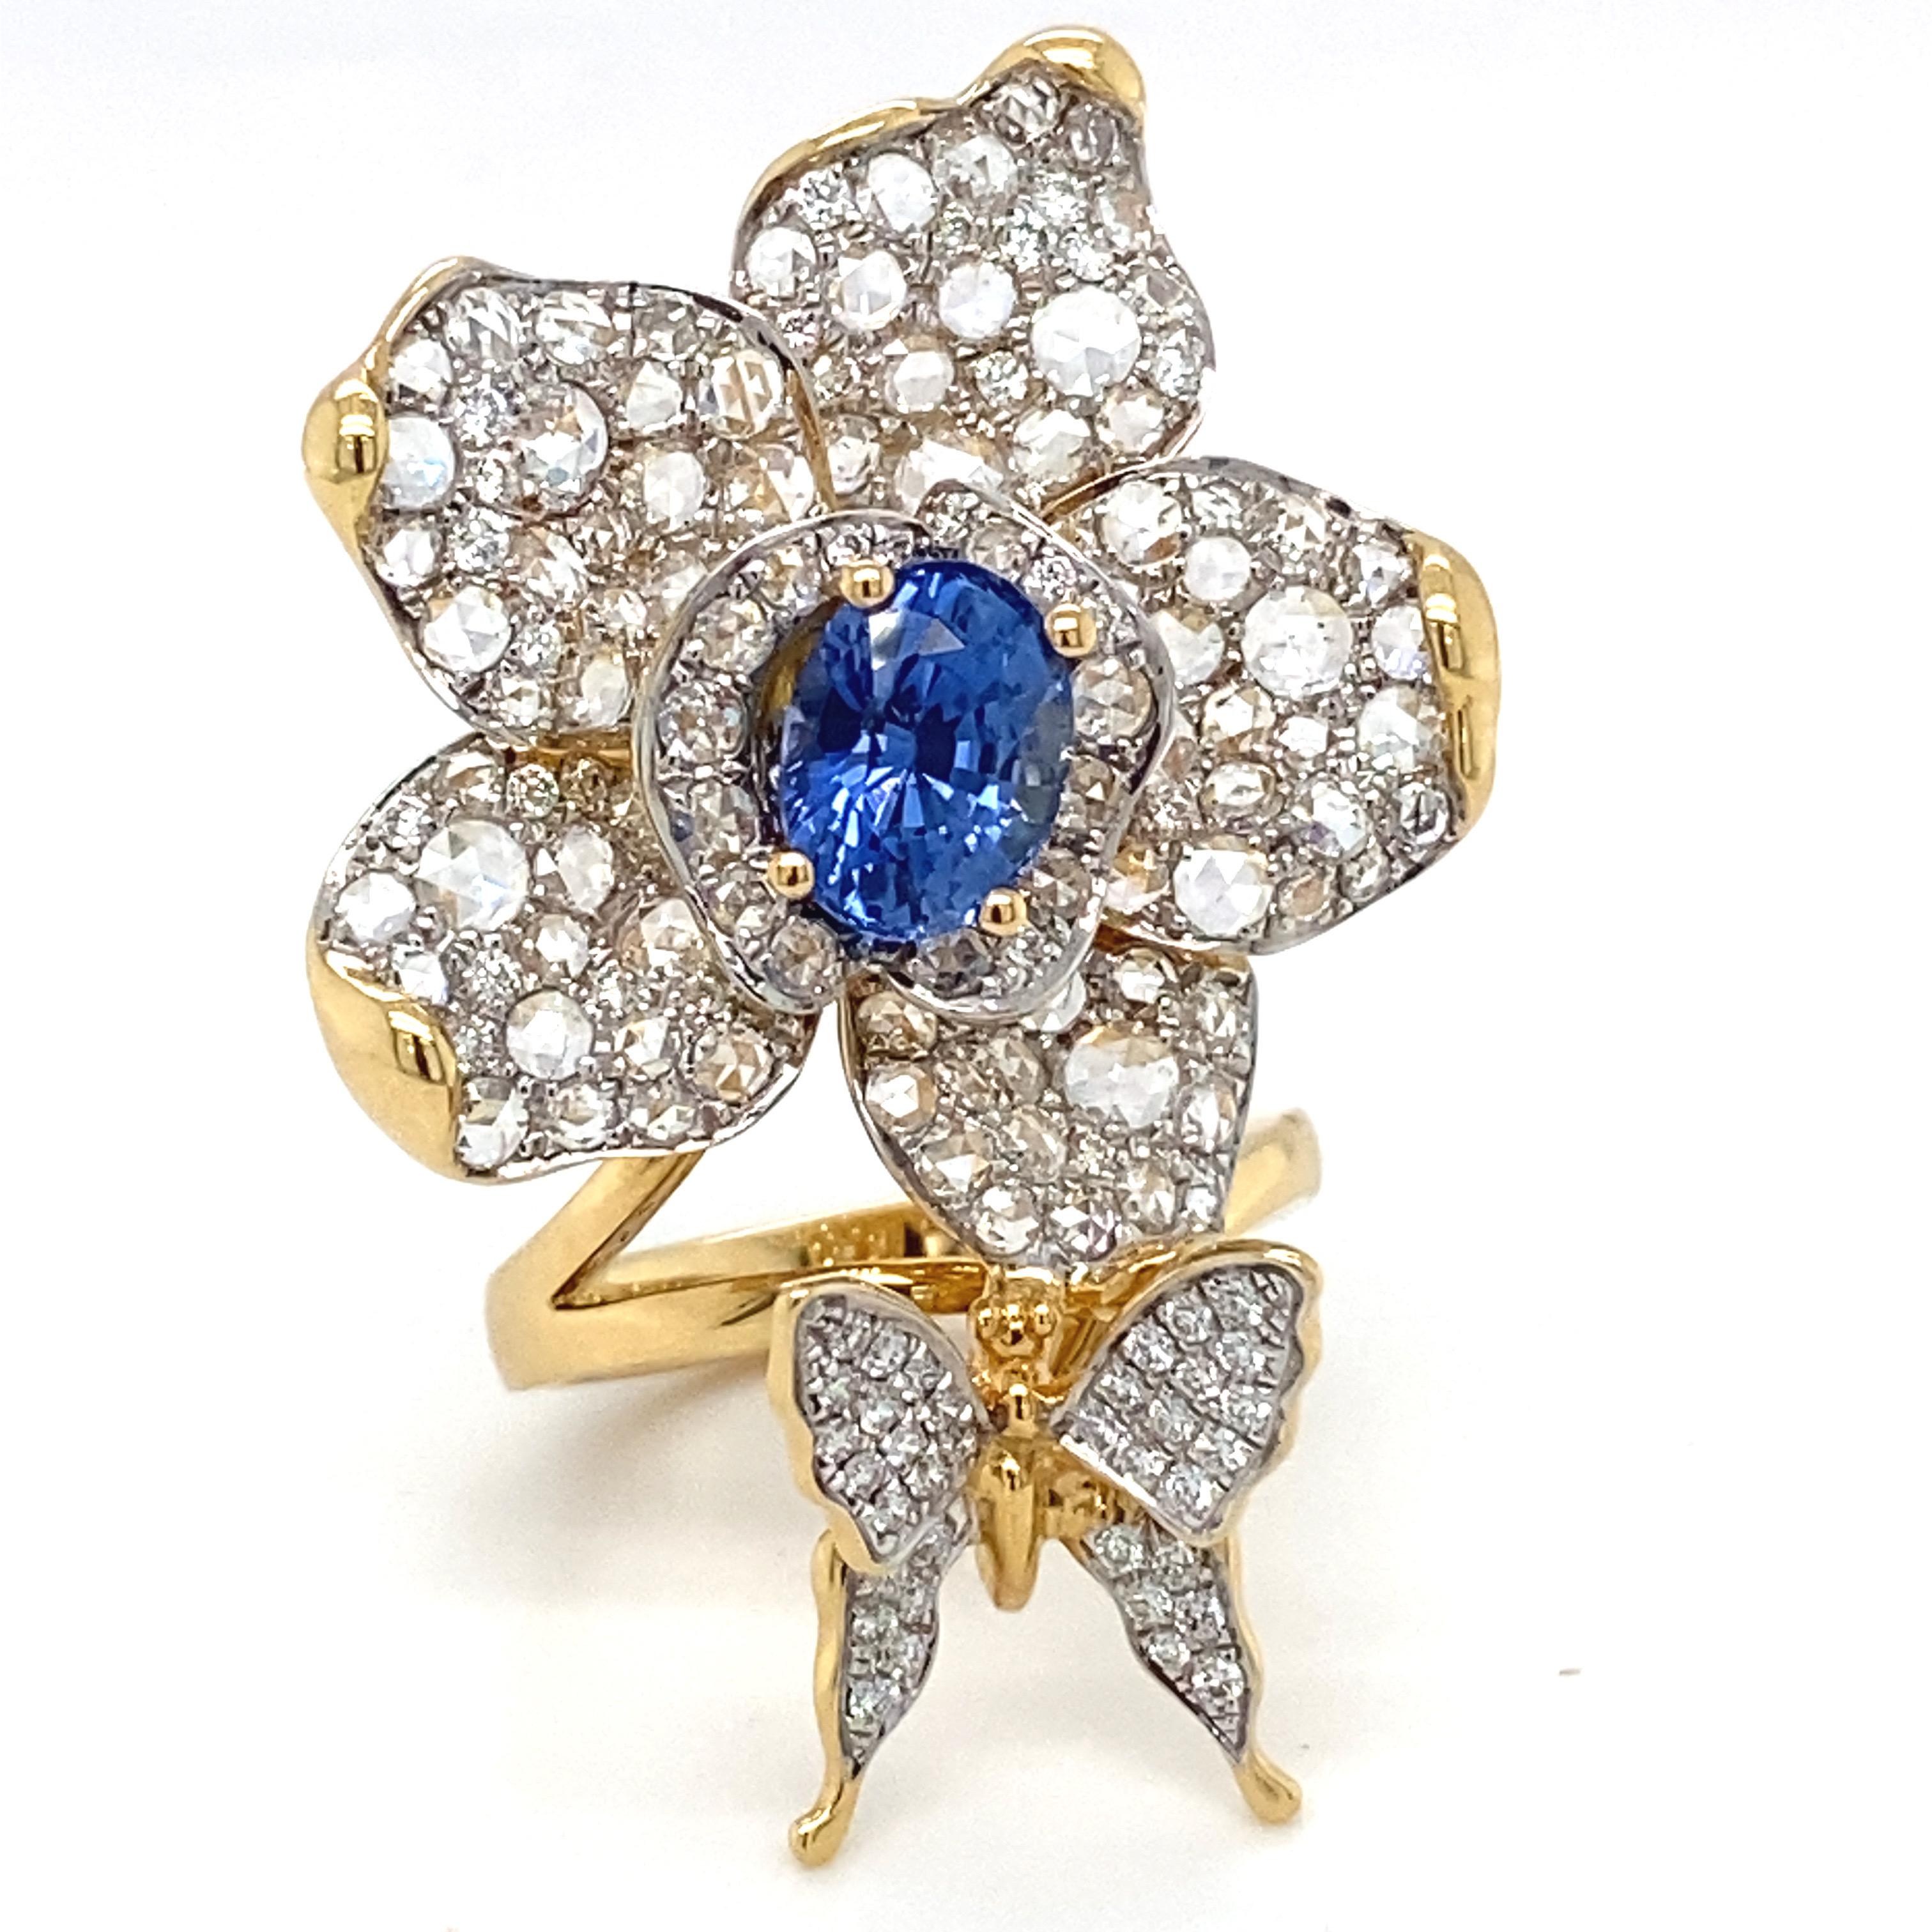 This magnificent floral ring boasts a delightful combination of blue sapphire and diamond. Flower petals and the butterfly is adorned with pave setting of white diamonds. Every detail work is carefully crafted and refined to create this exceptional